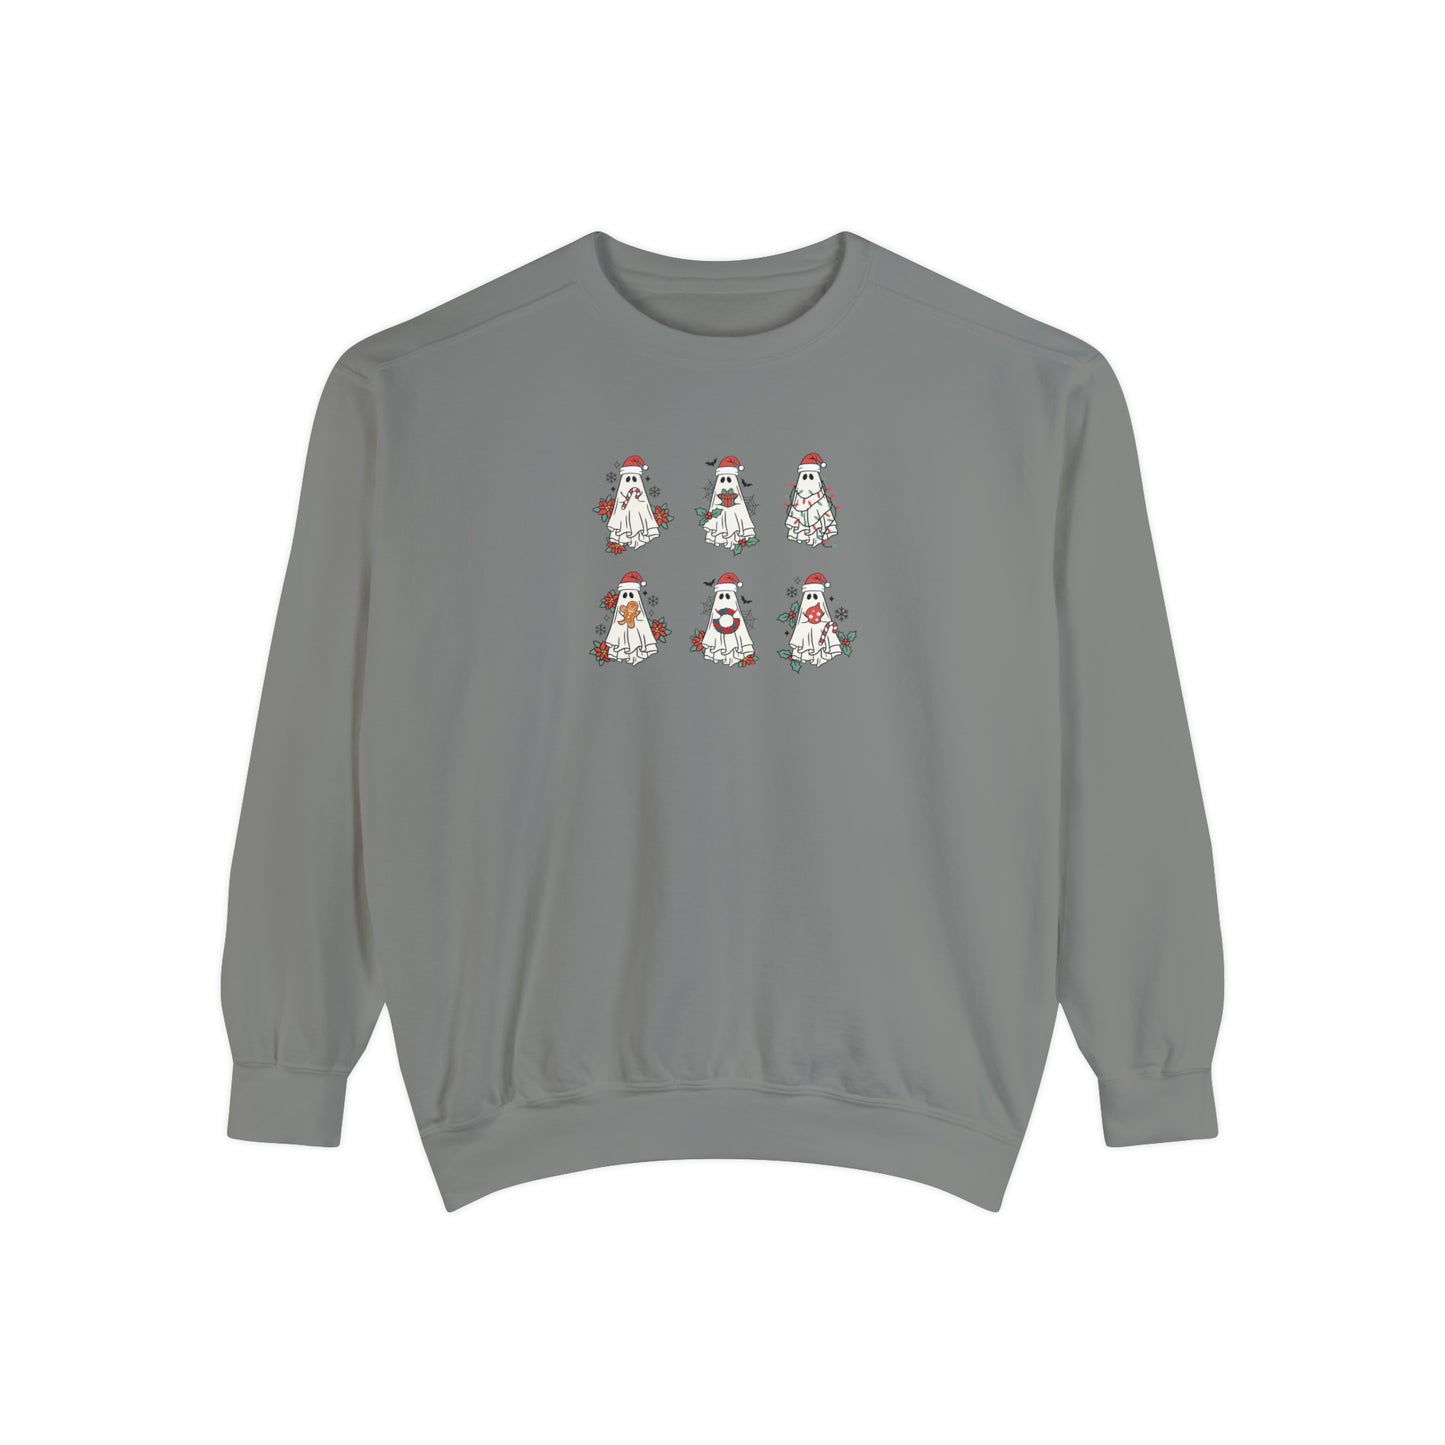 Christmas ghosts Sweatshirt for holiday season. Dead inside but is Christmas time. Cute Christmas sweater for her or him.